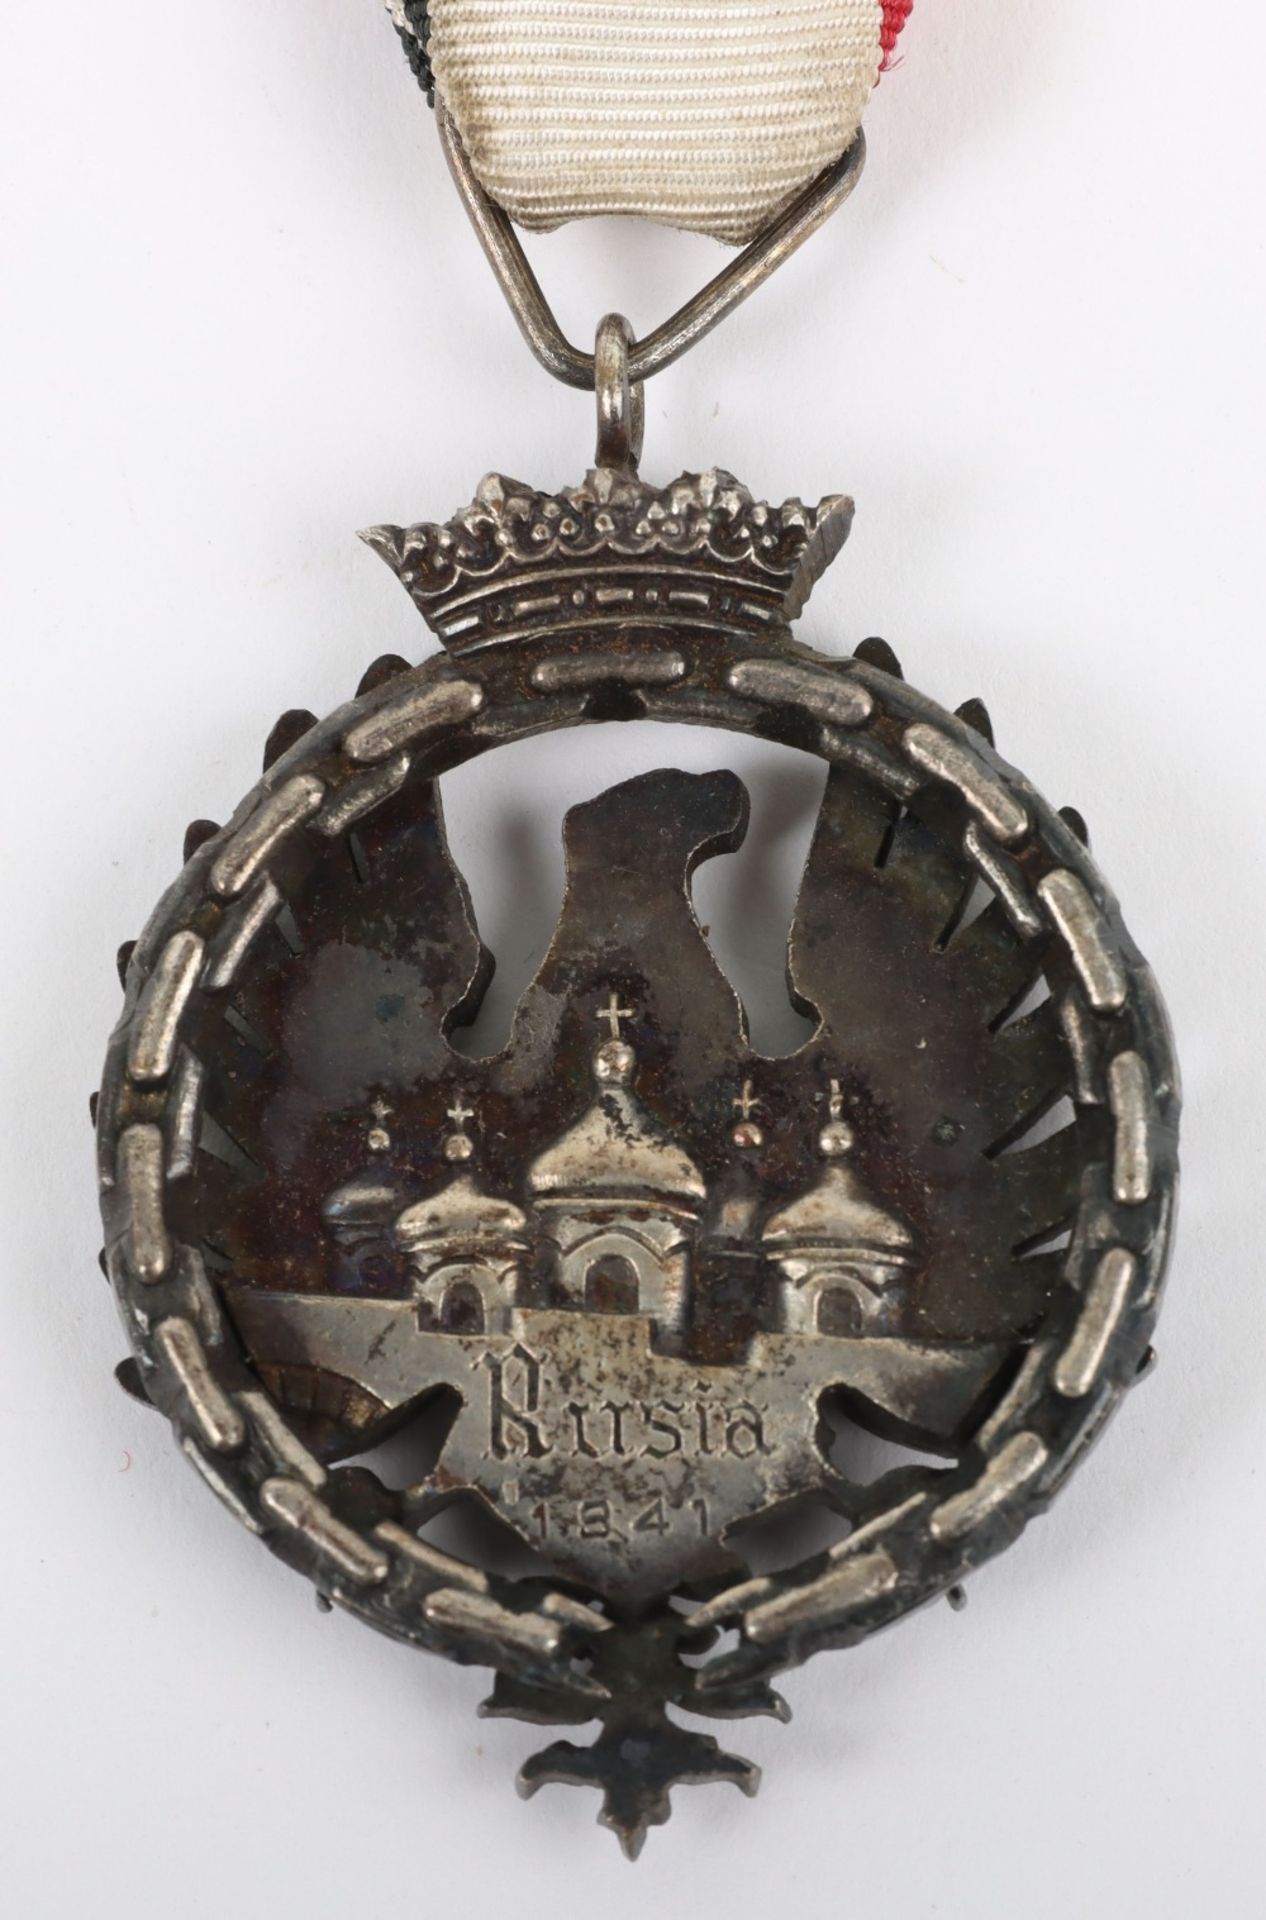 Spanish Volunteers Medal for Russia 1941 - Image 4 of 4